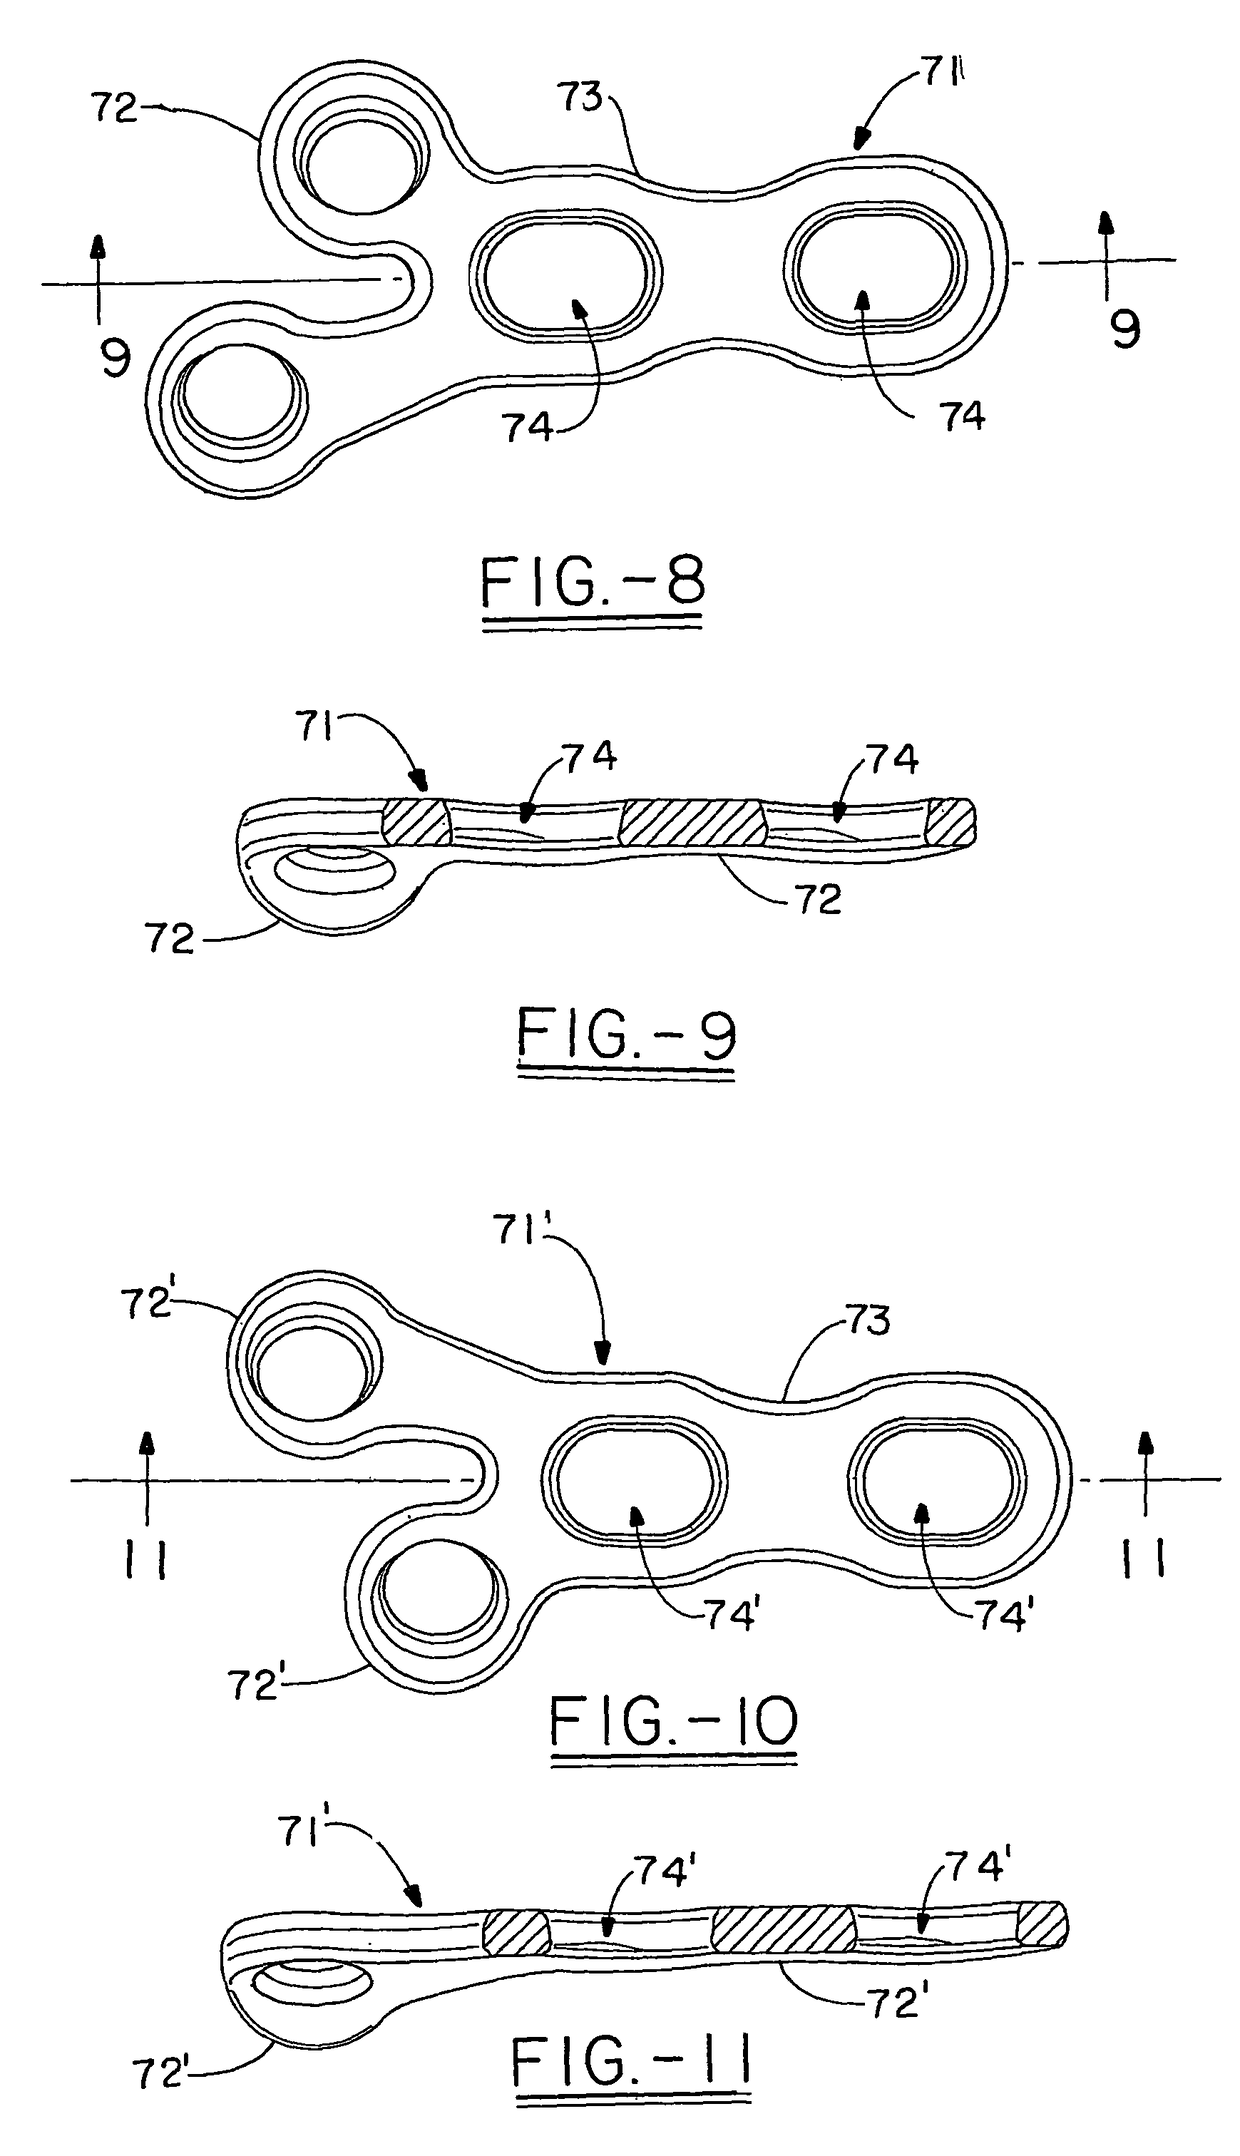 Orthopedic plates for use in clavicle repair and methods for their use